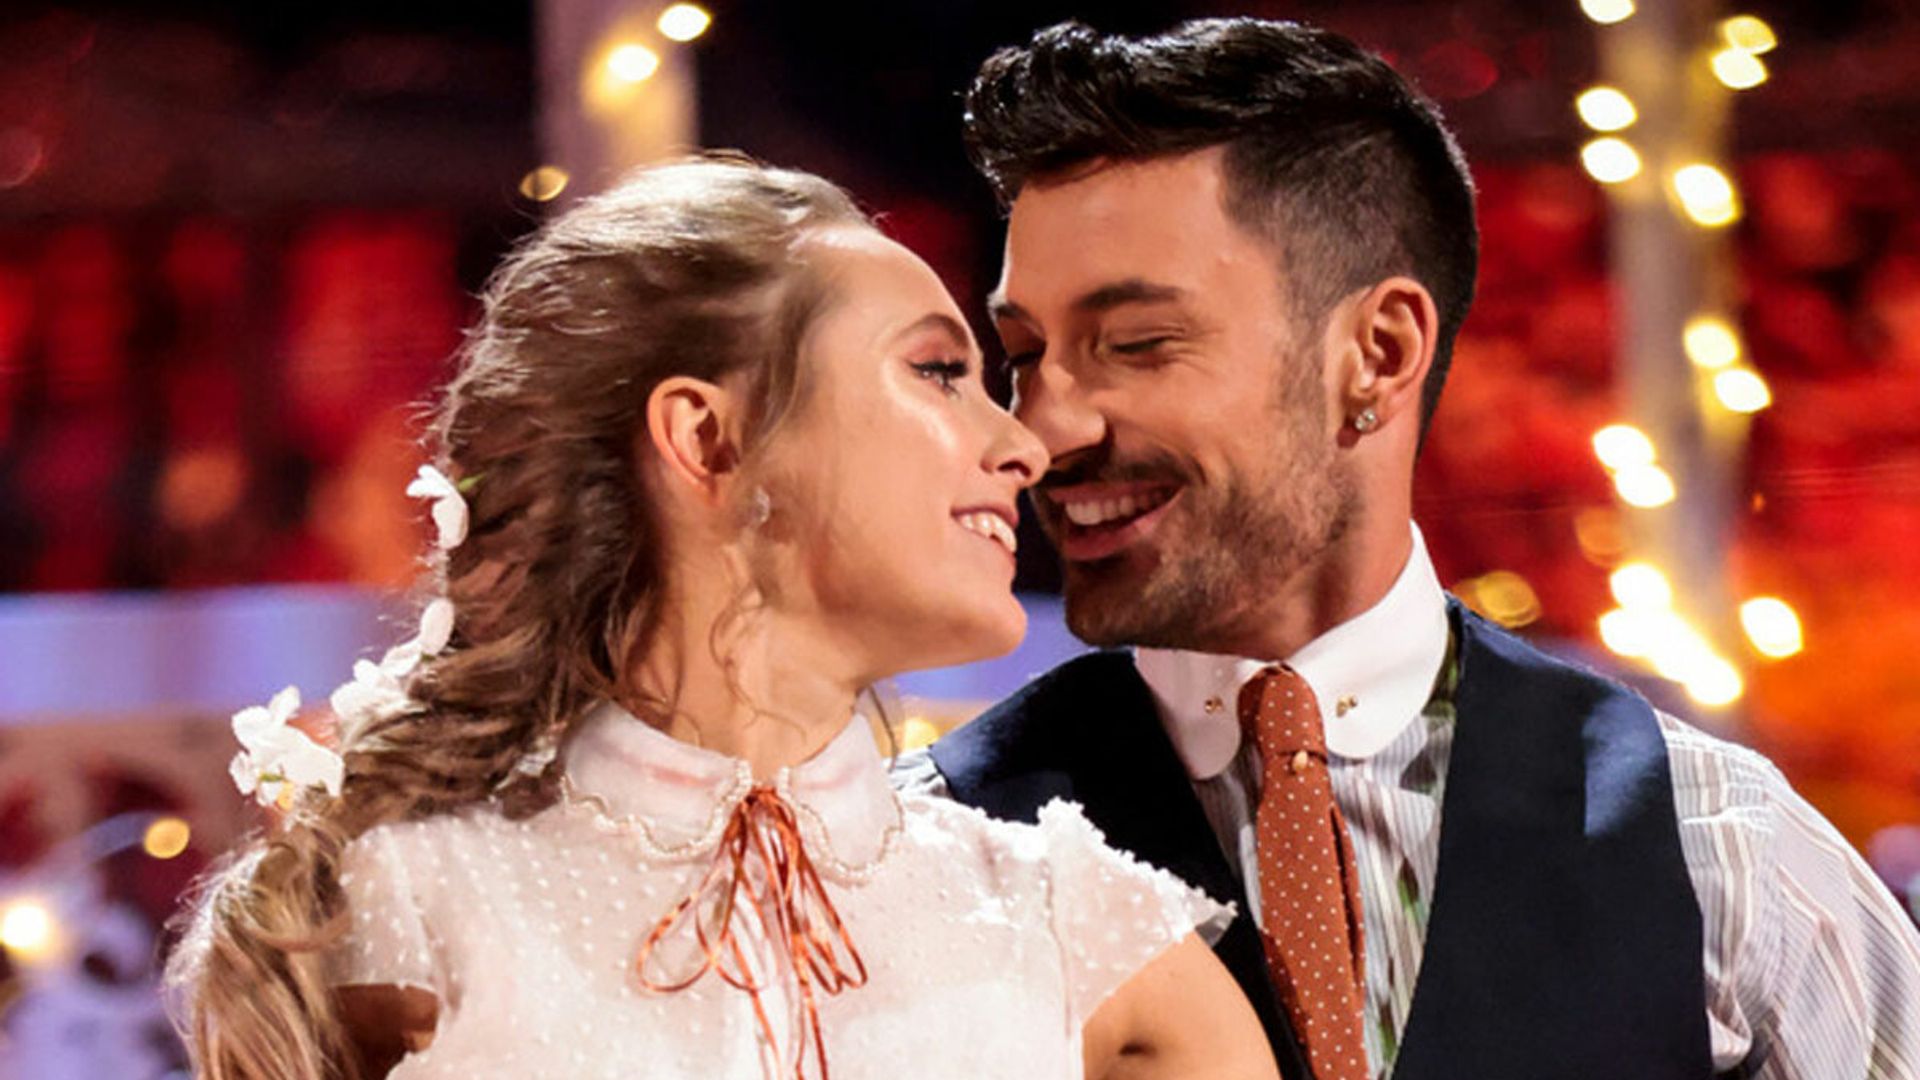 Giovanni Pernice reveals new tattoo in tribute to Strictly partner Rose Ayling-Ellis